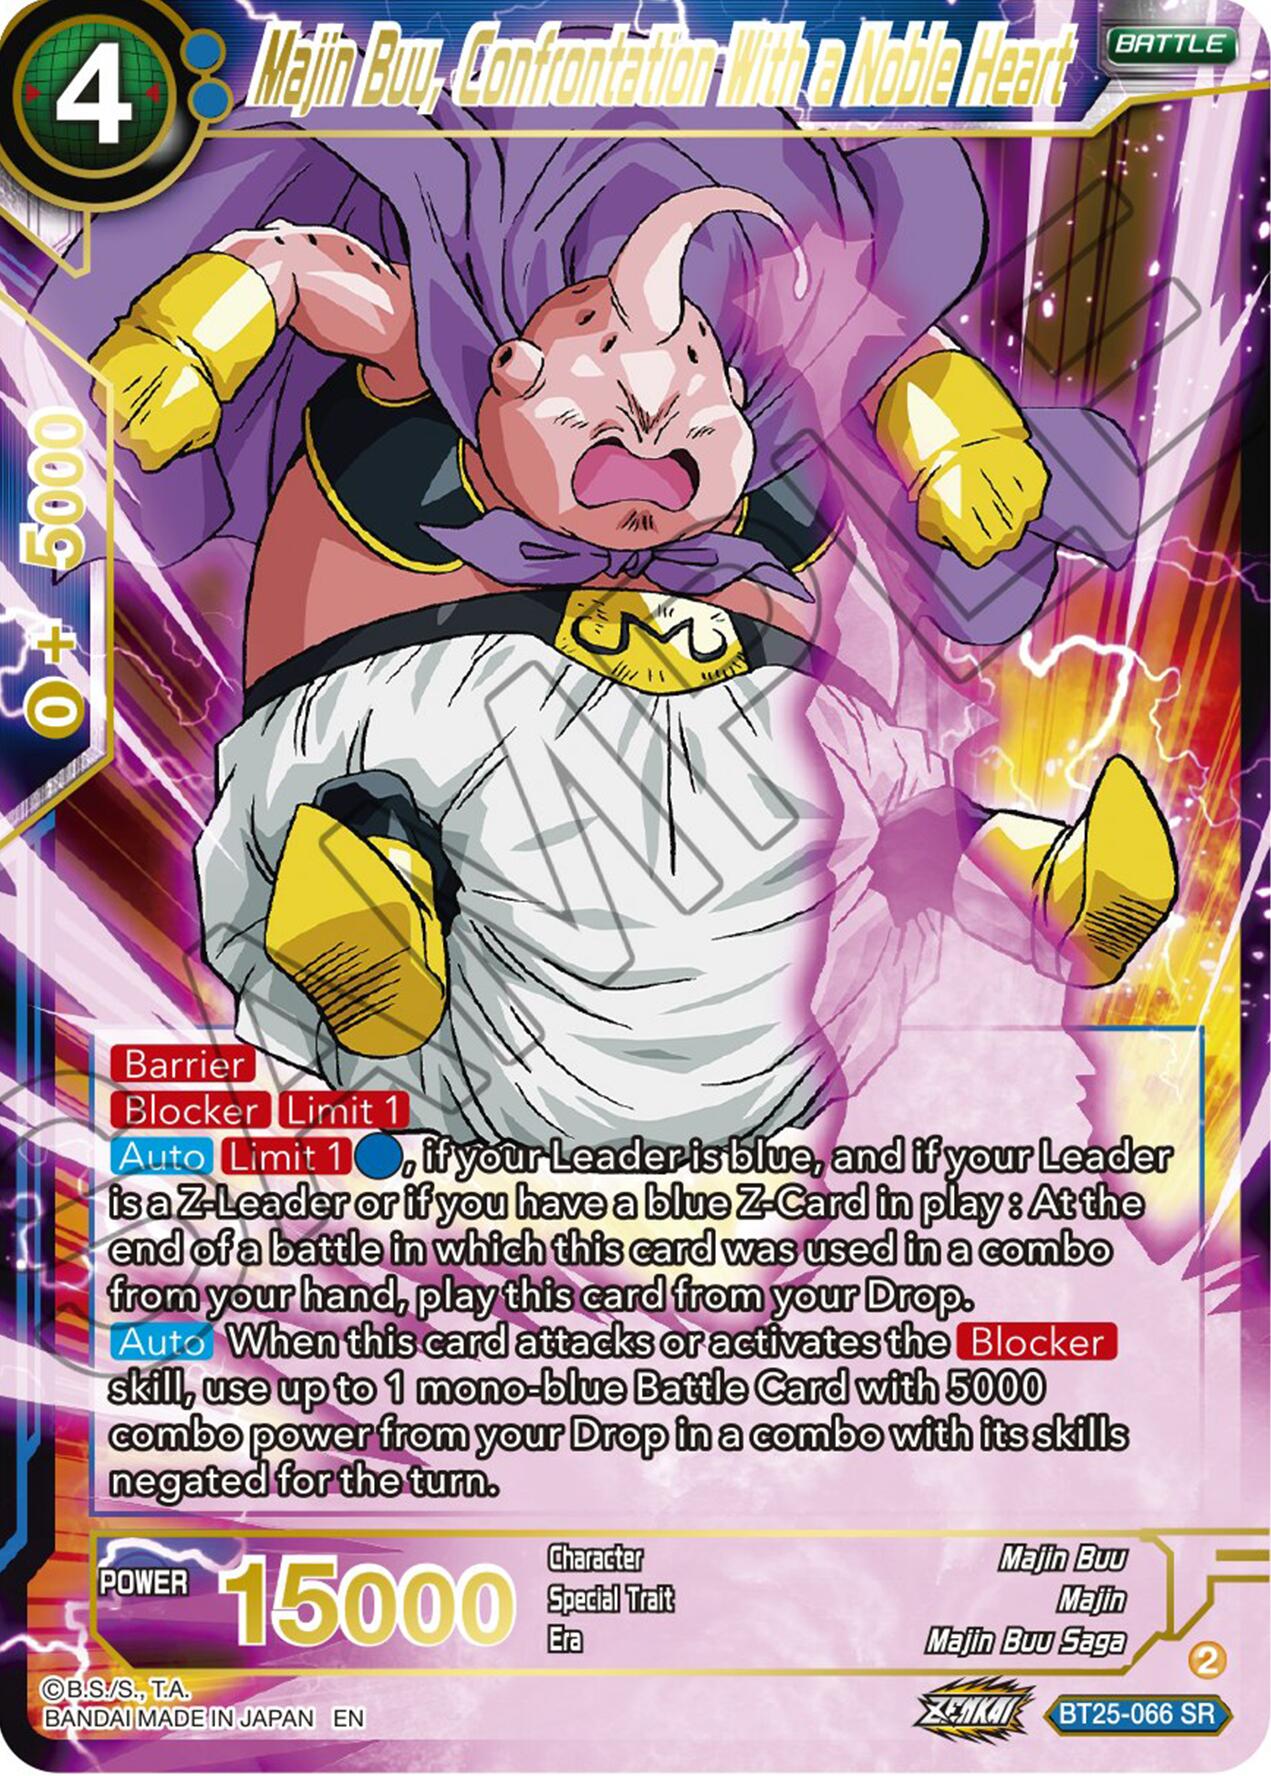 Majin Buu, Confrontaliter With a Mobile Heat (BT25-066) [Legend of the Dragon Balls] | Amazing Games TCG